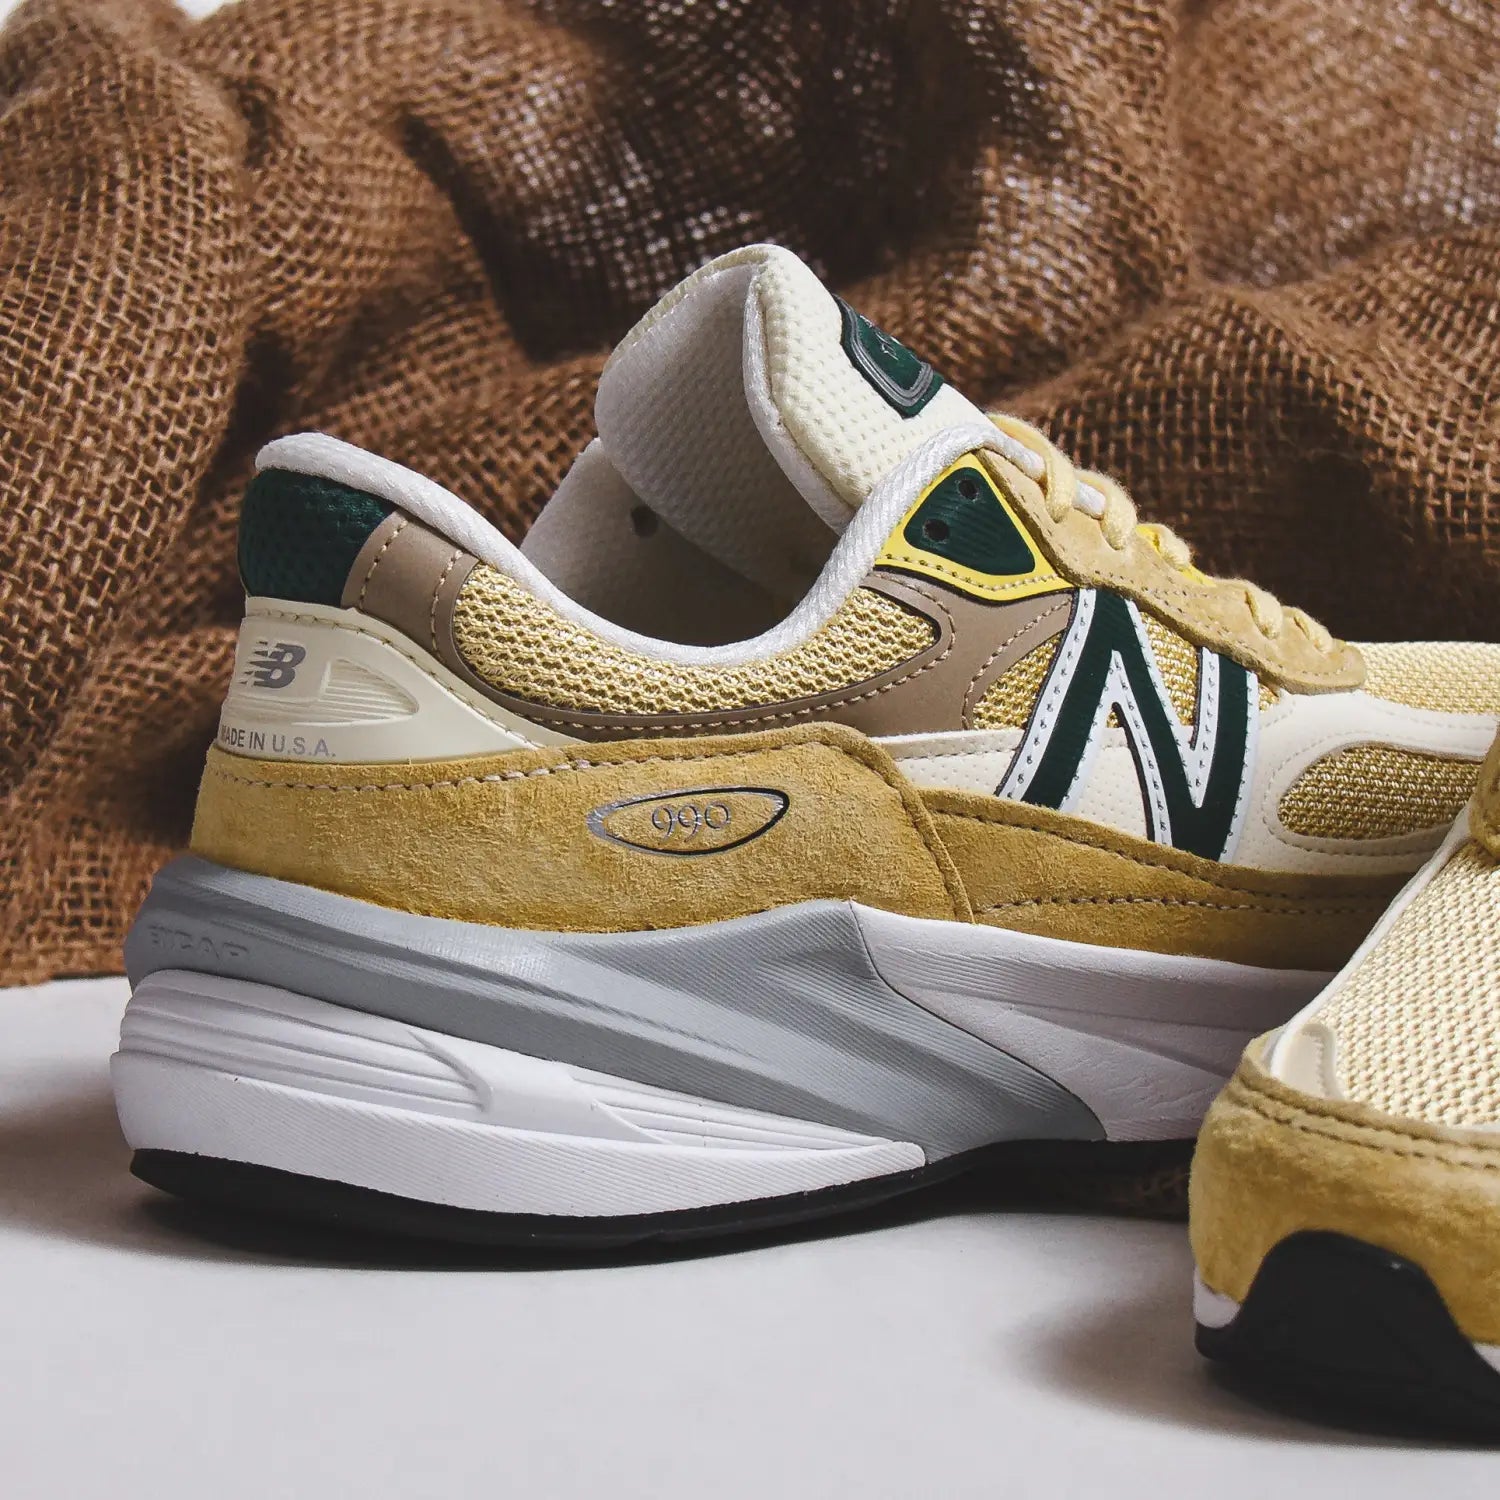 The Latest Additions to the New Balance MADE in USA Collection